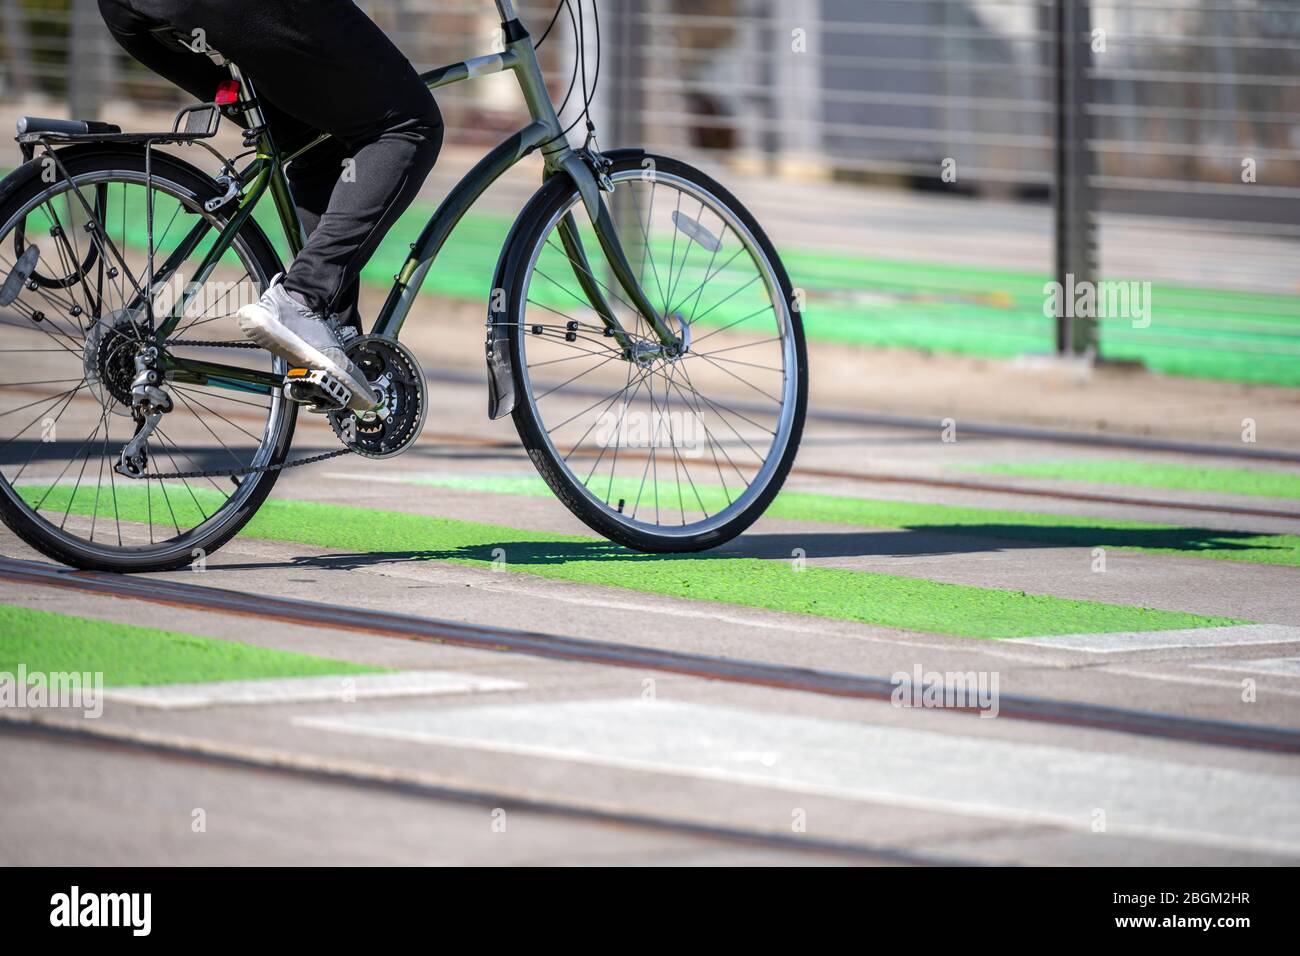 A man on a bike pedals a bicycle crosses tram tracks on a dedicated crossing for cyclists and pedestrians preferring healthy lifestyle using cycling r Stock Photo